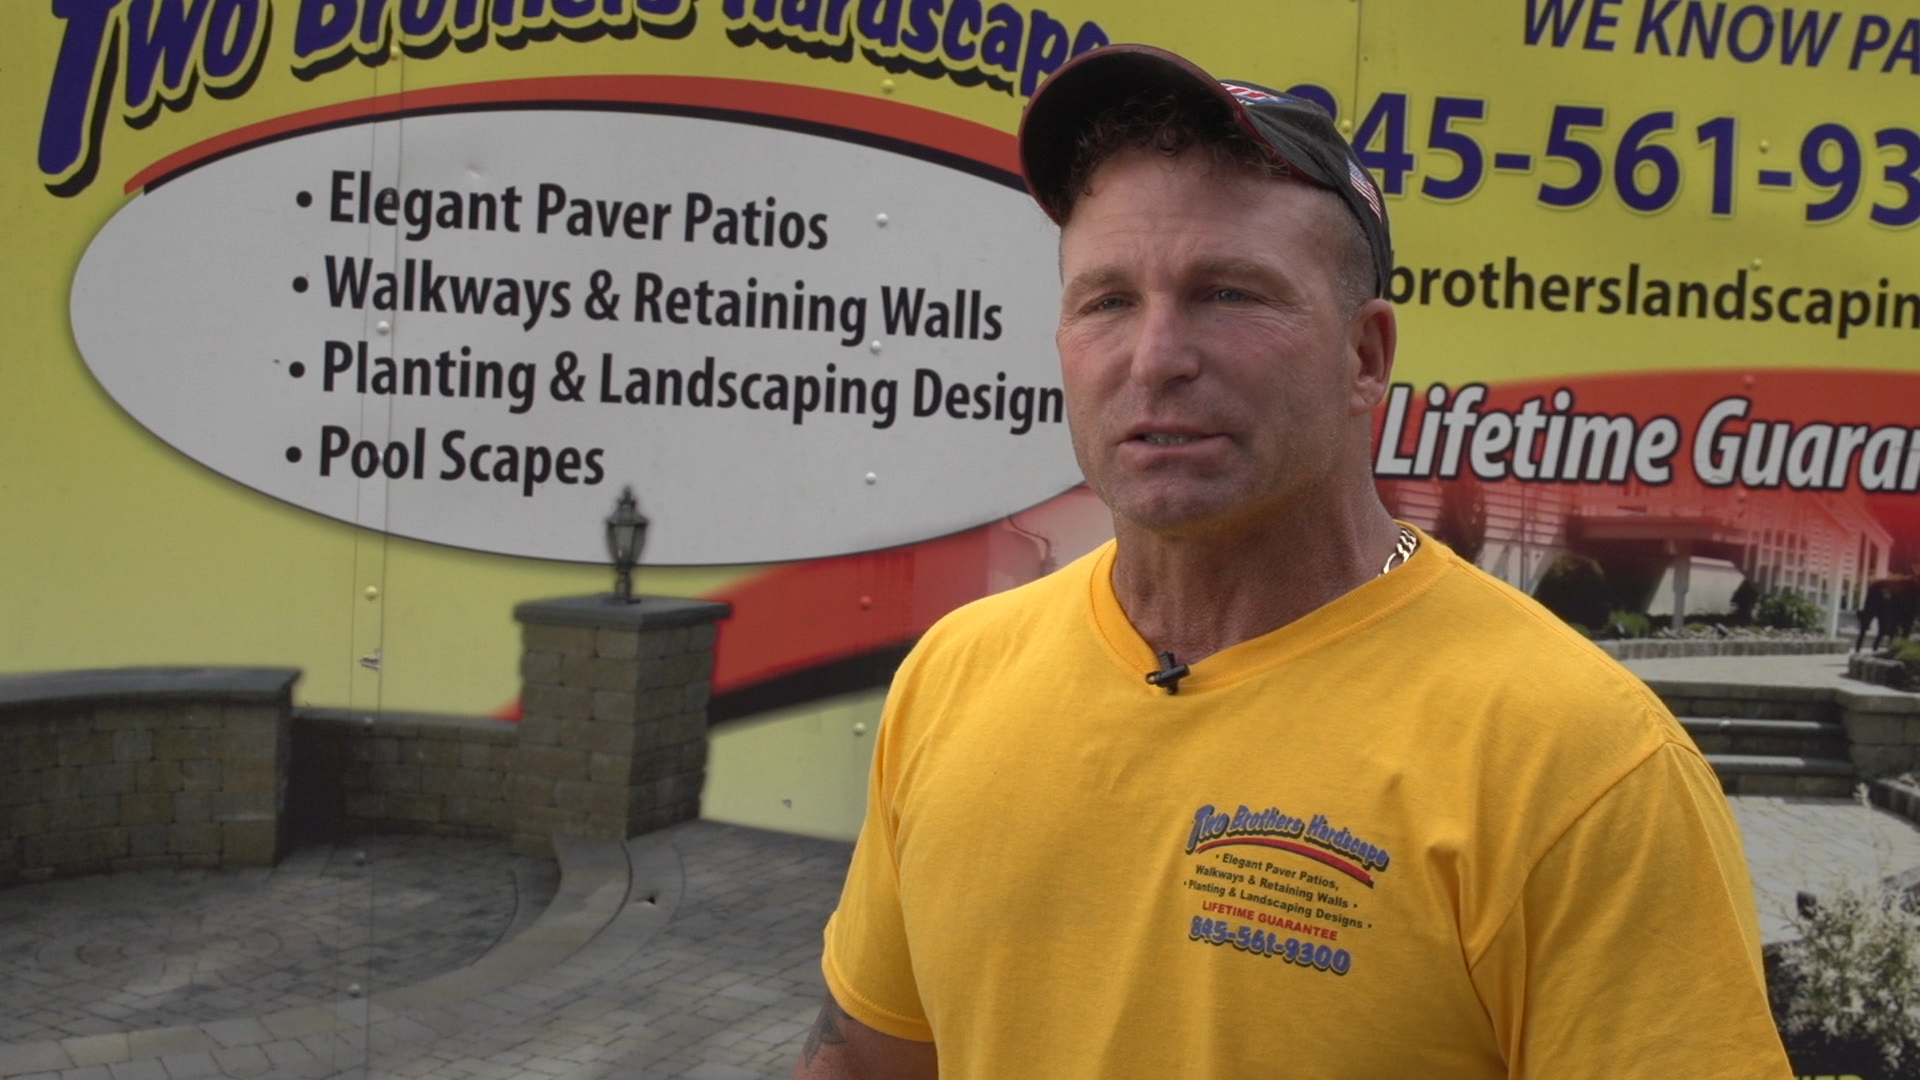 Two-Brothers-Landscaping-advertising-video-testimonial